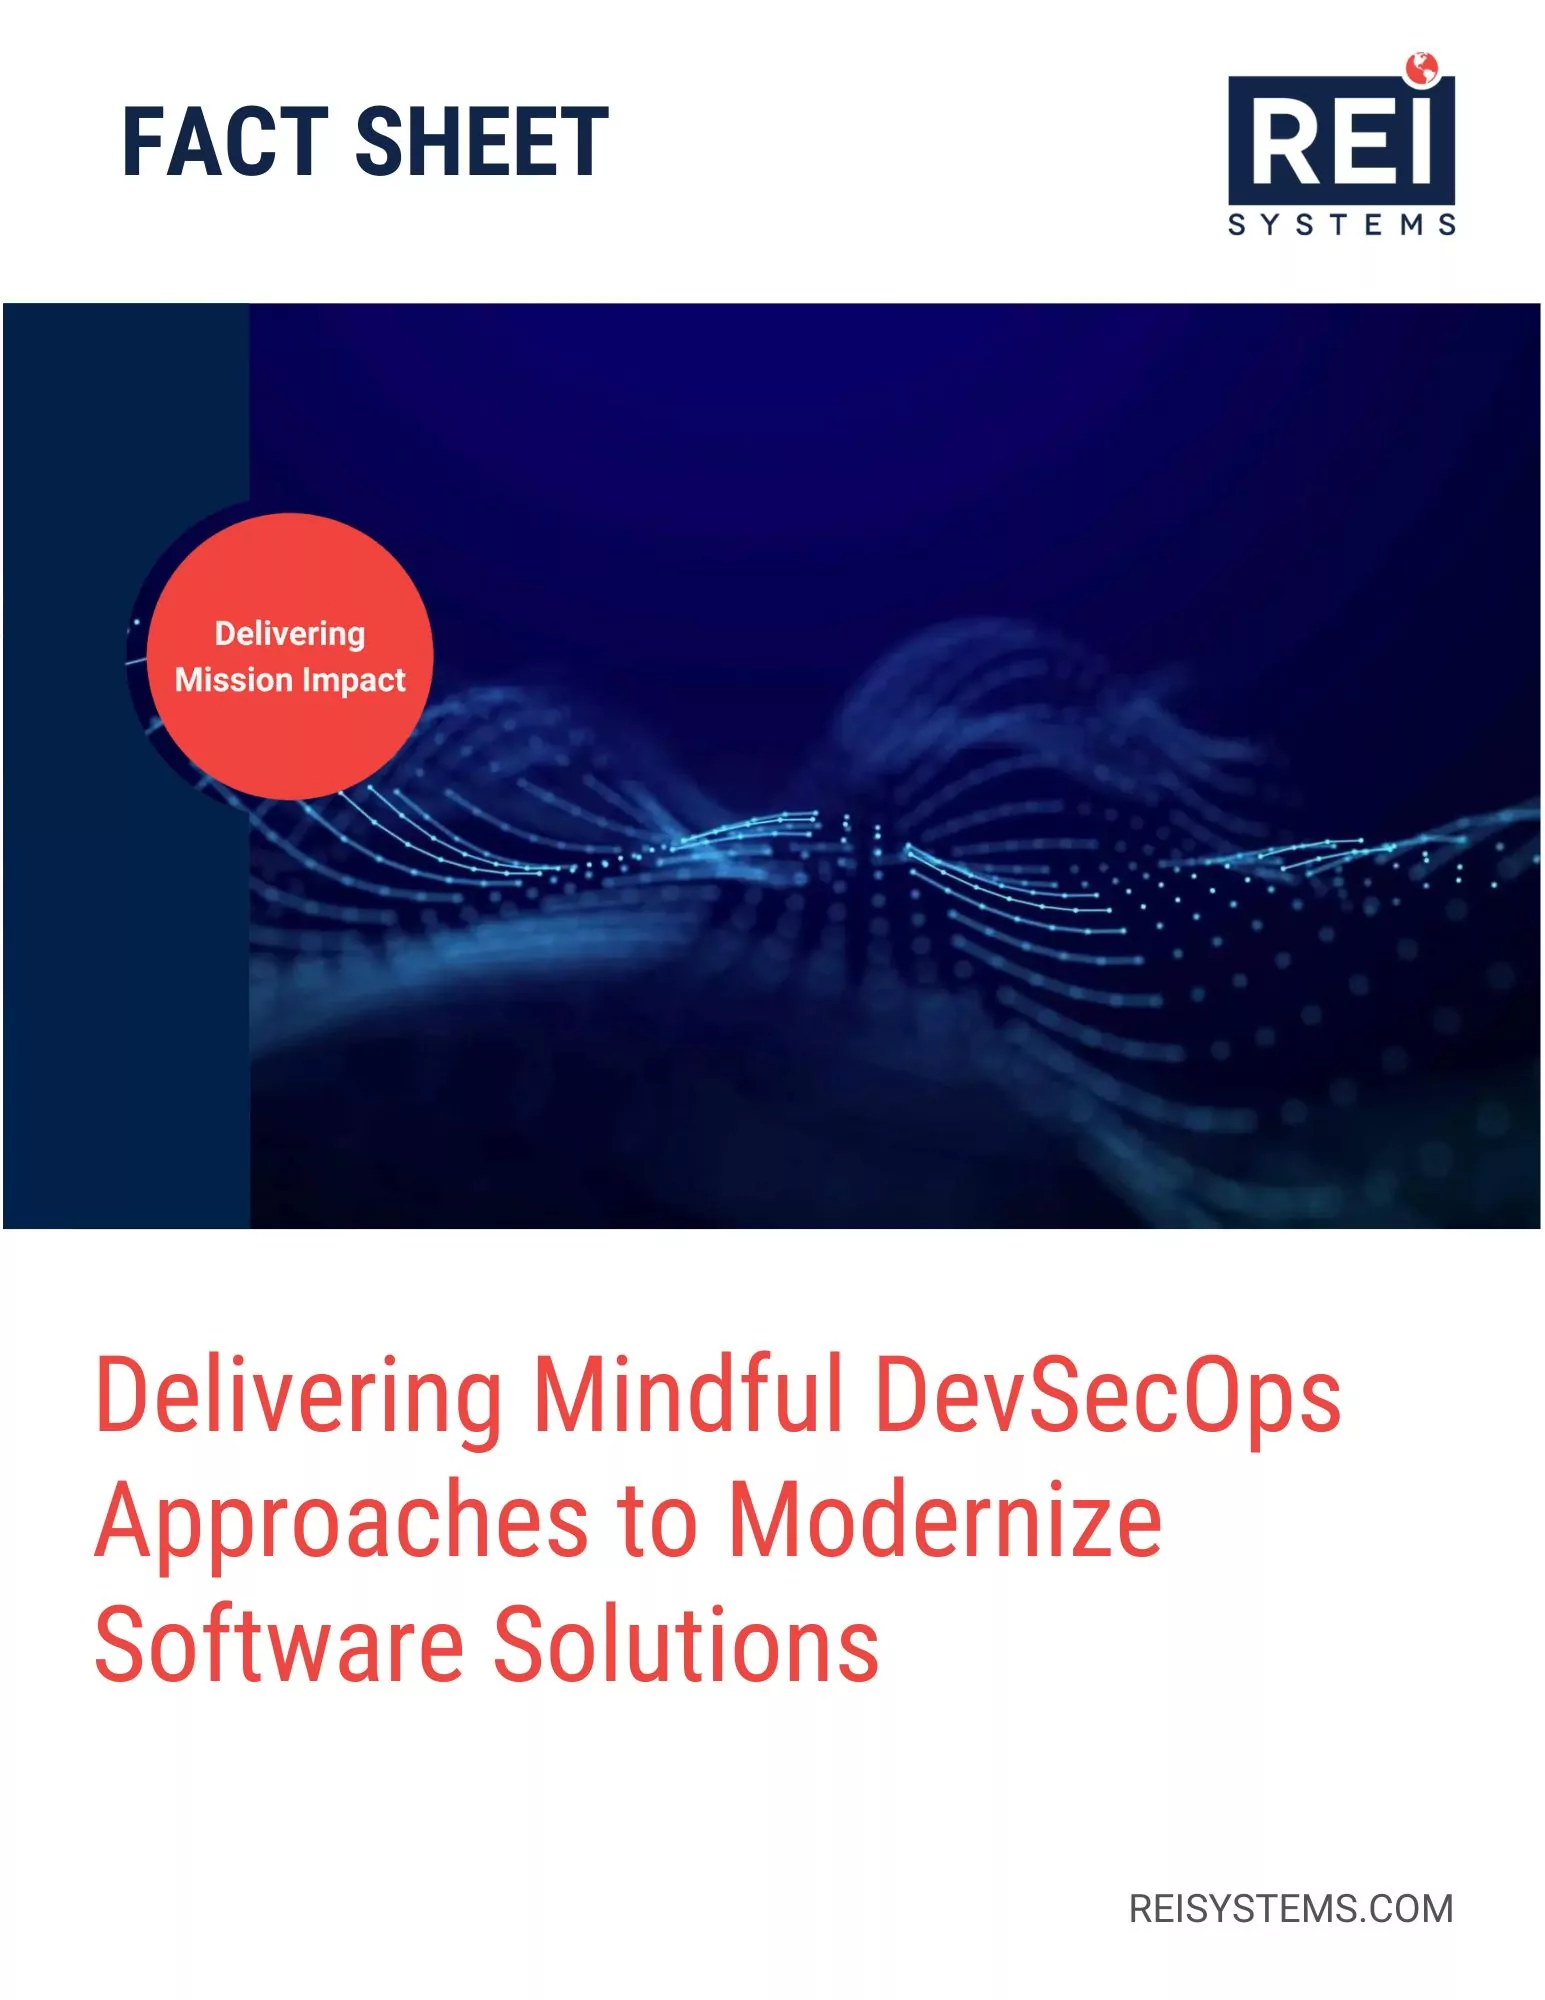 Delivering Mindful DevSecOps Approaches to Modernize Software Solutions